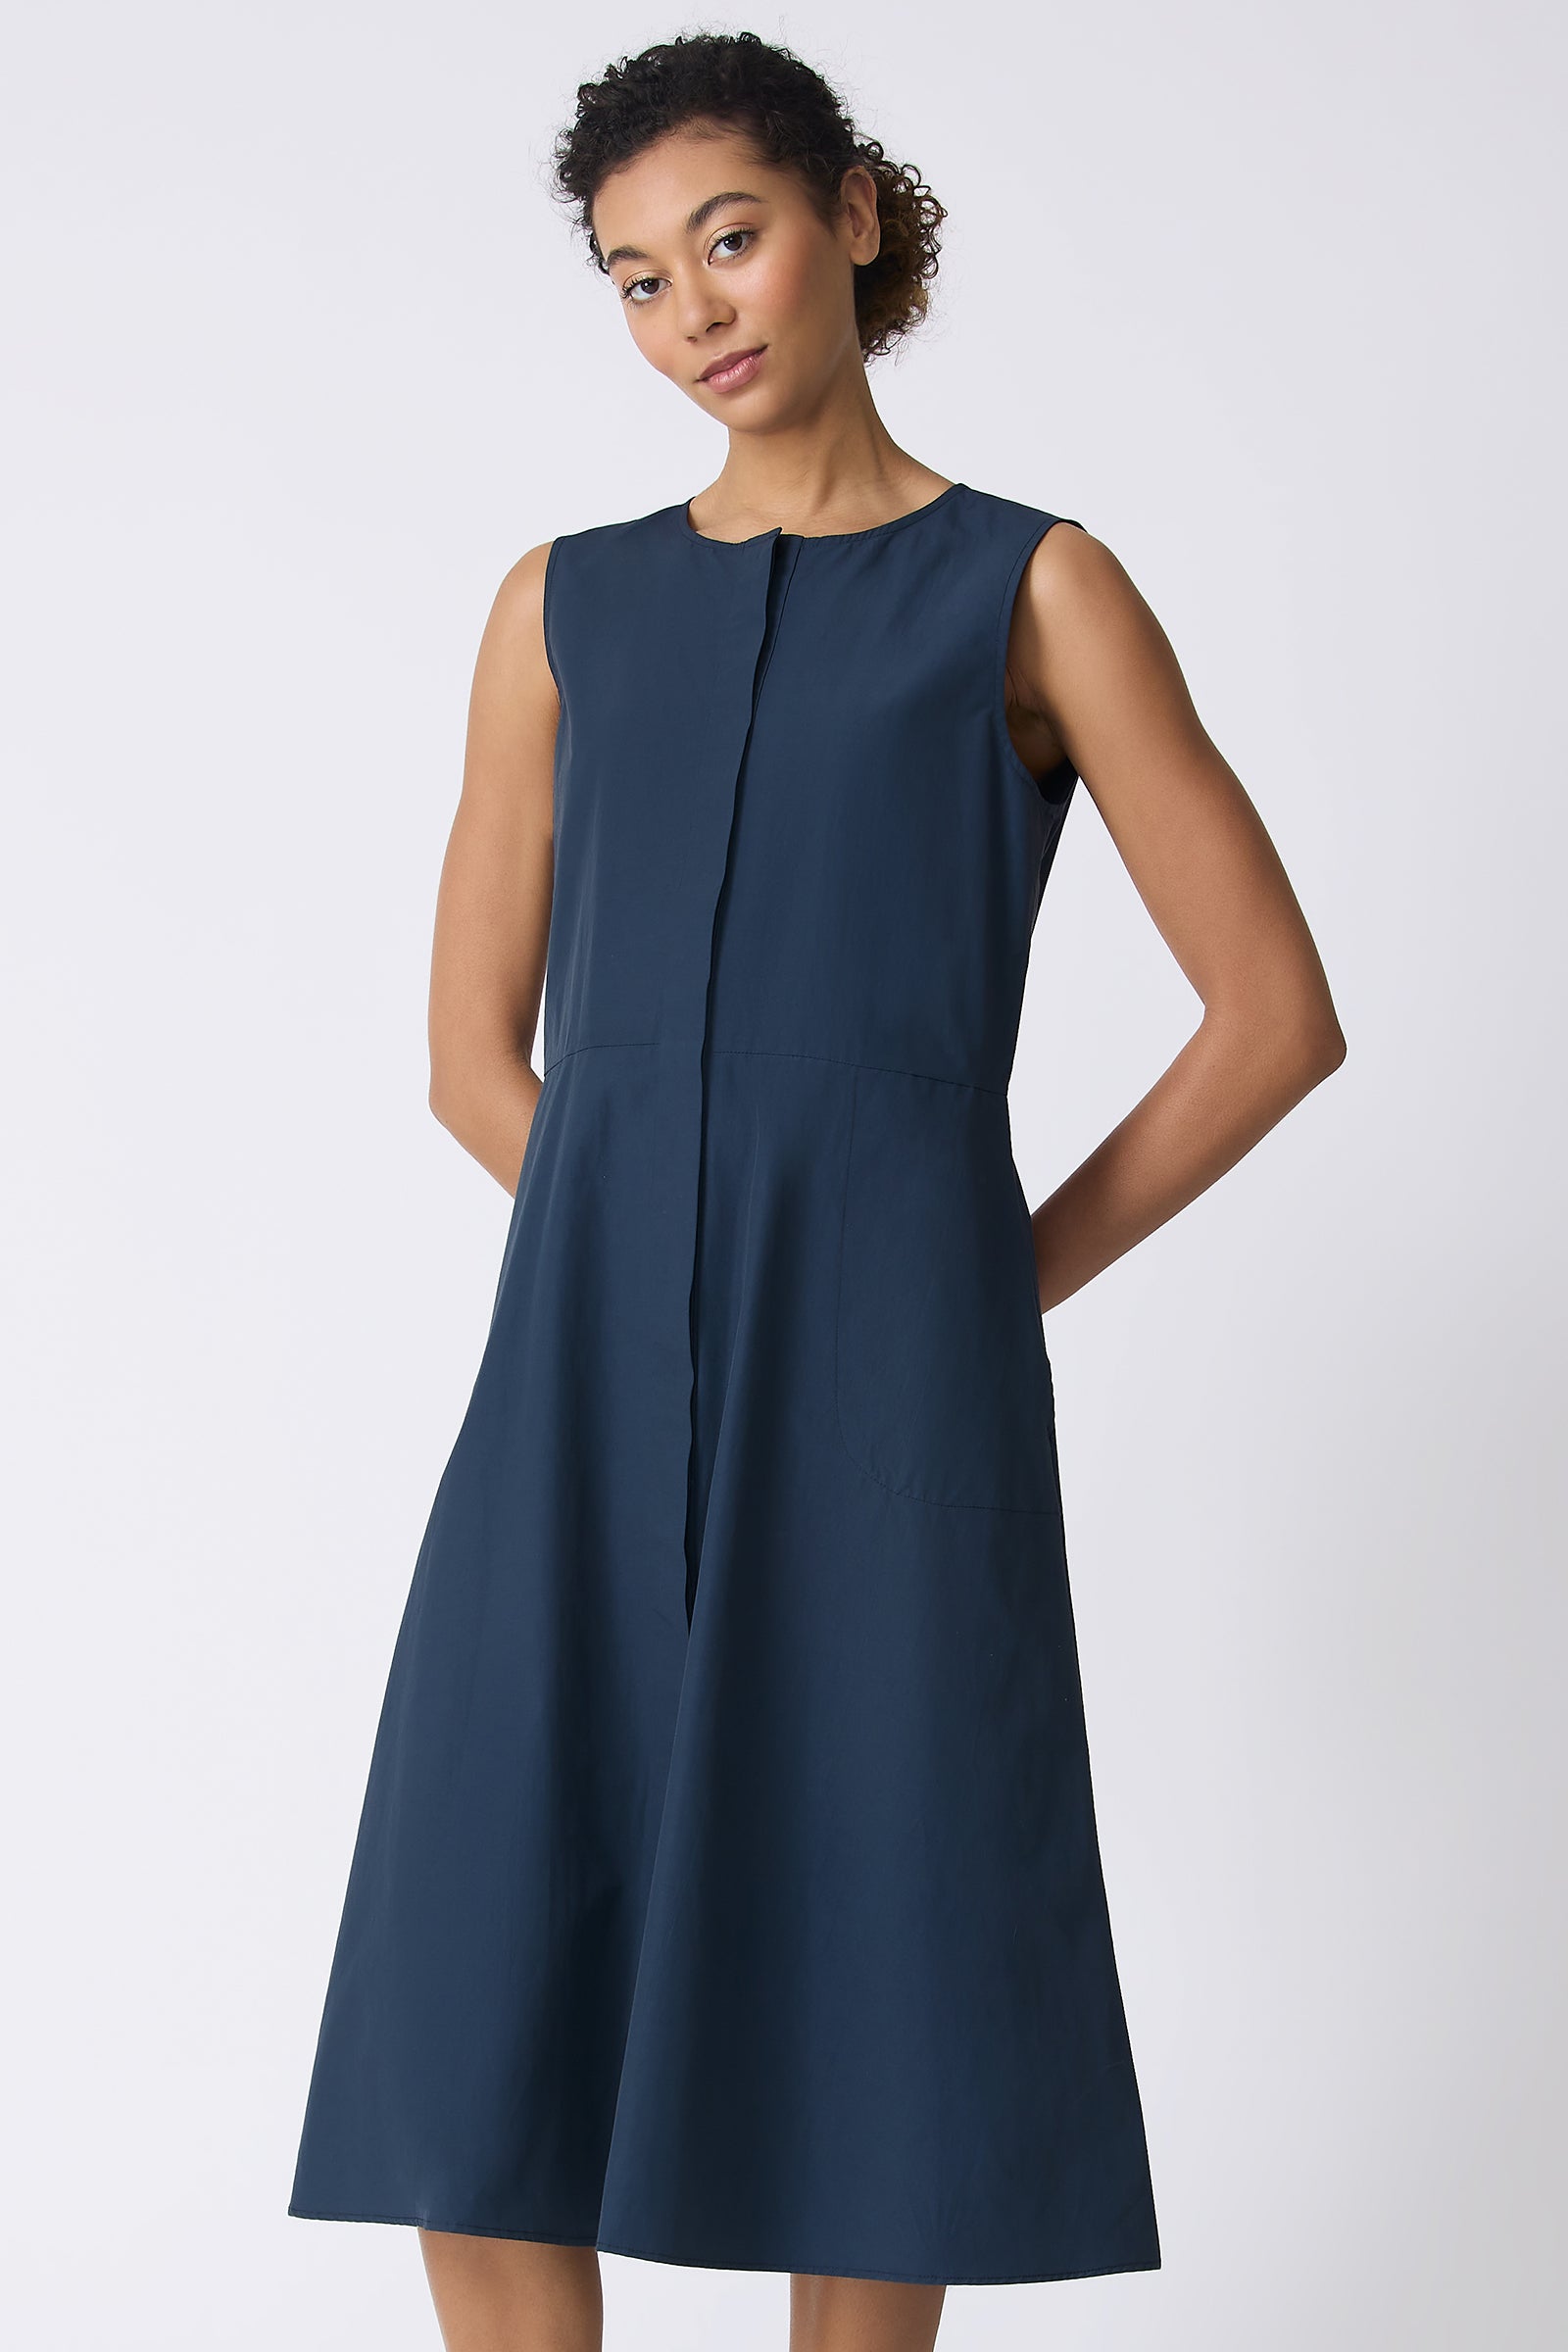 Kal Rieman Marina Dress in Summer Navy on model with hands behind back front view